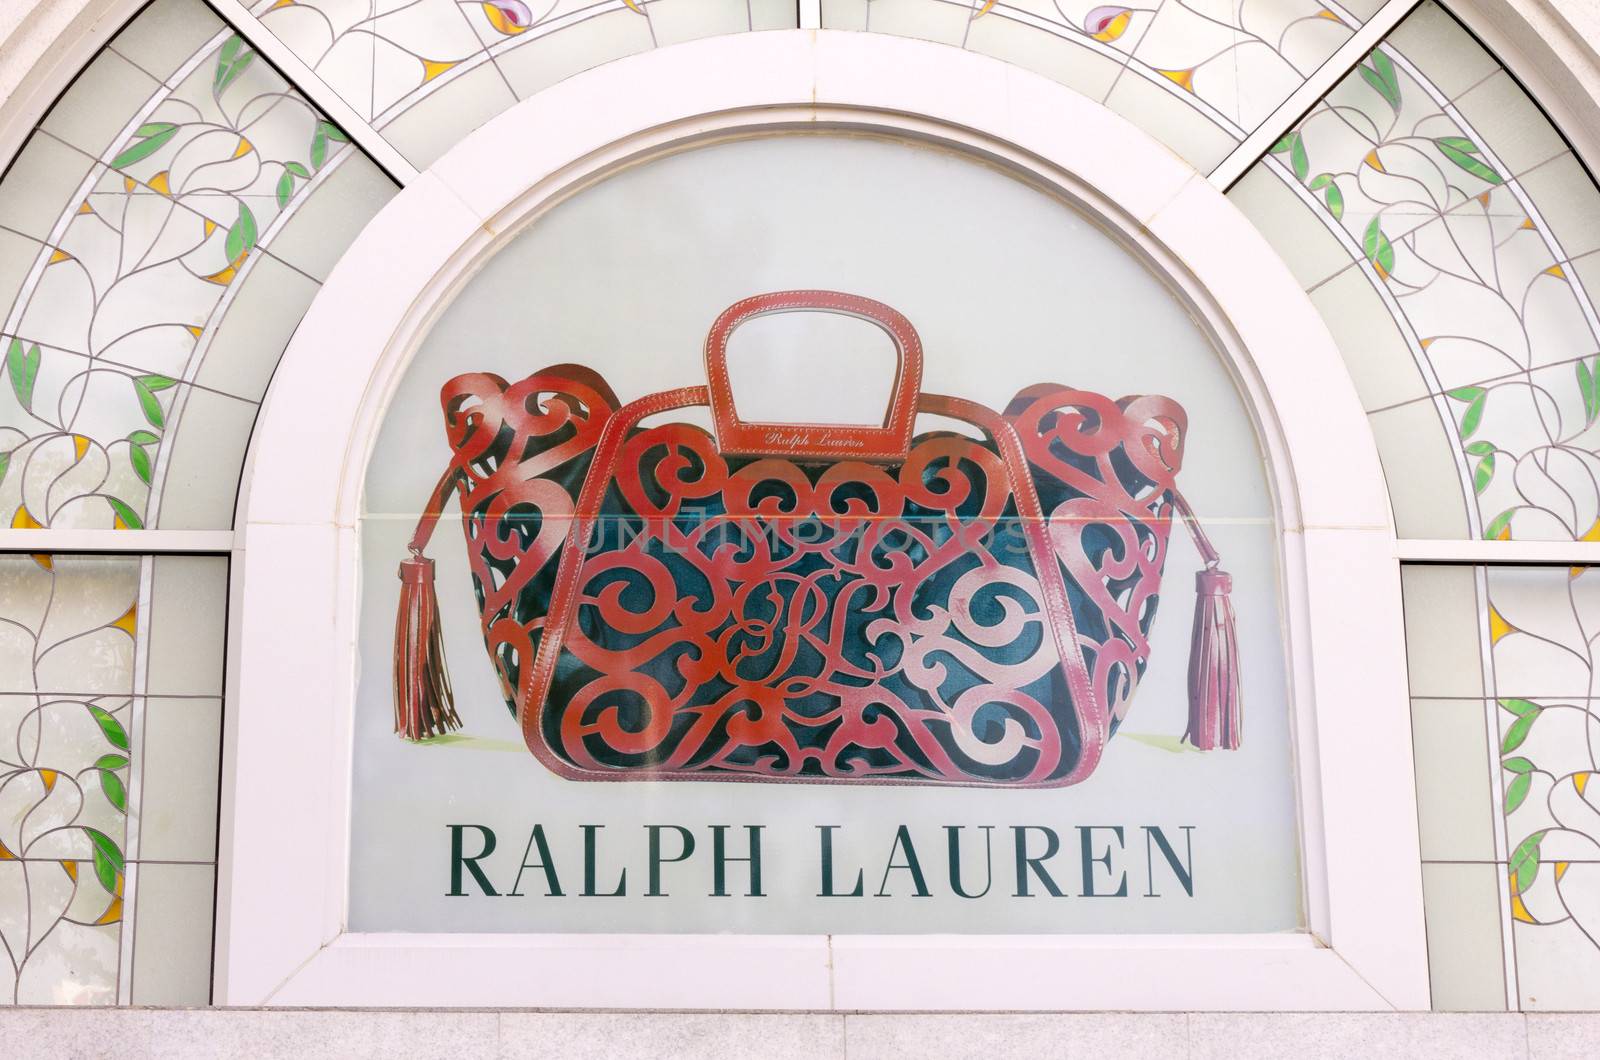 HO CHI MINH CITY, VIETNAM-OCTOBER 31ST 2013: Ralph Lauren store in Ho Chi Minh City. Ralph Lauren has just one store in the city located in the Vincom Center.